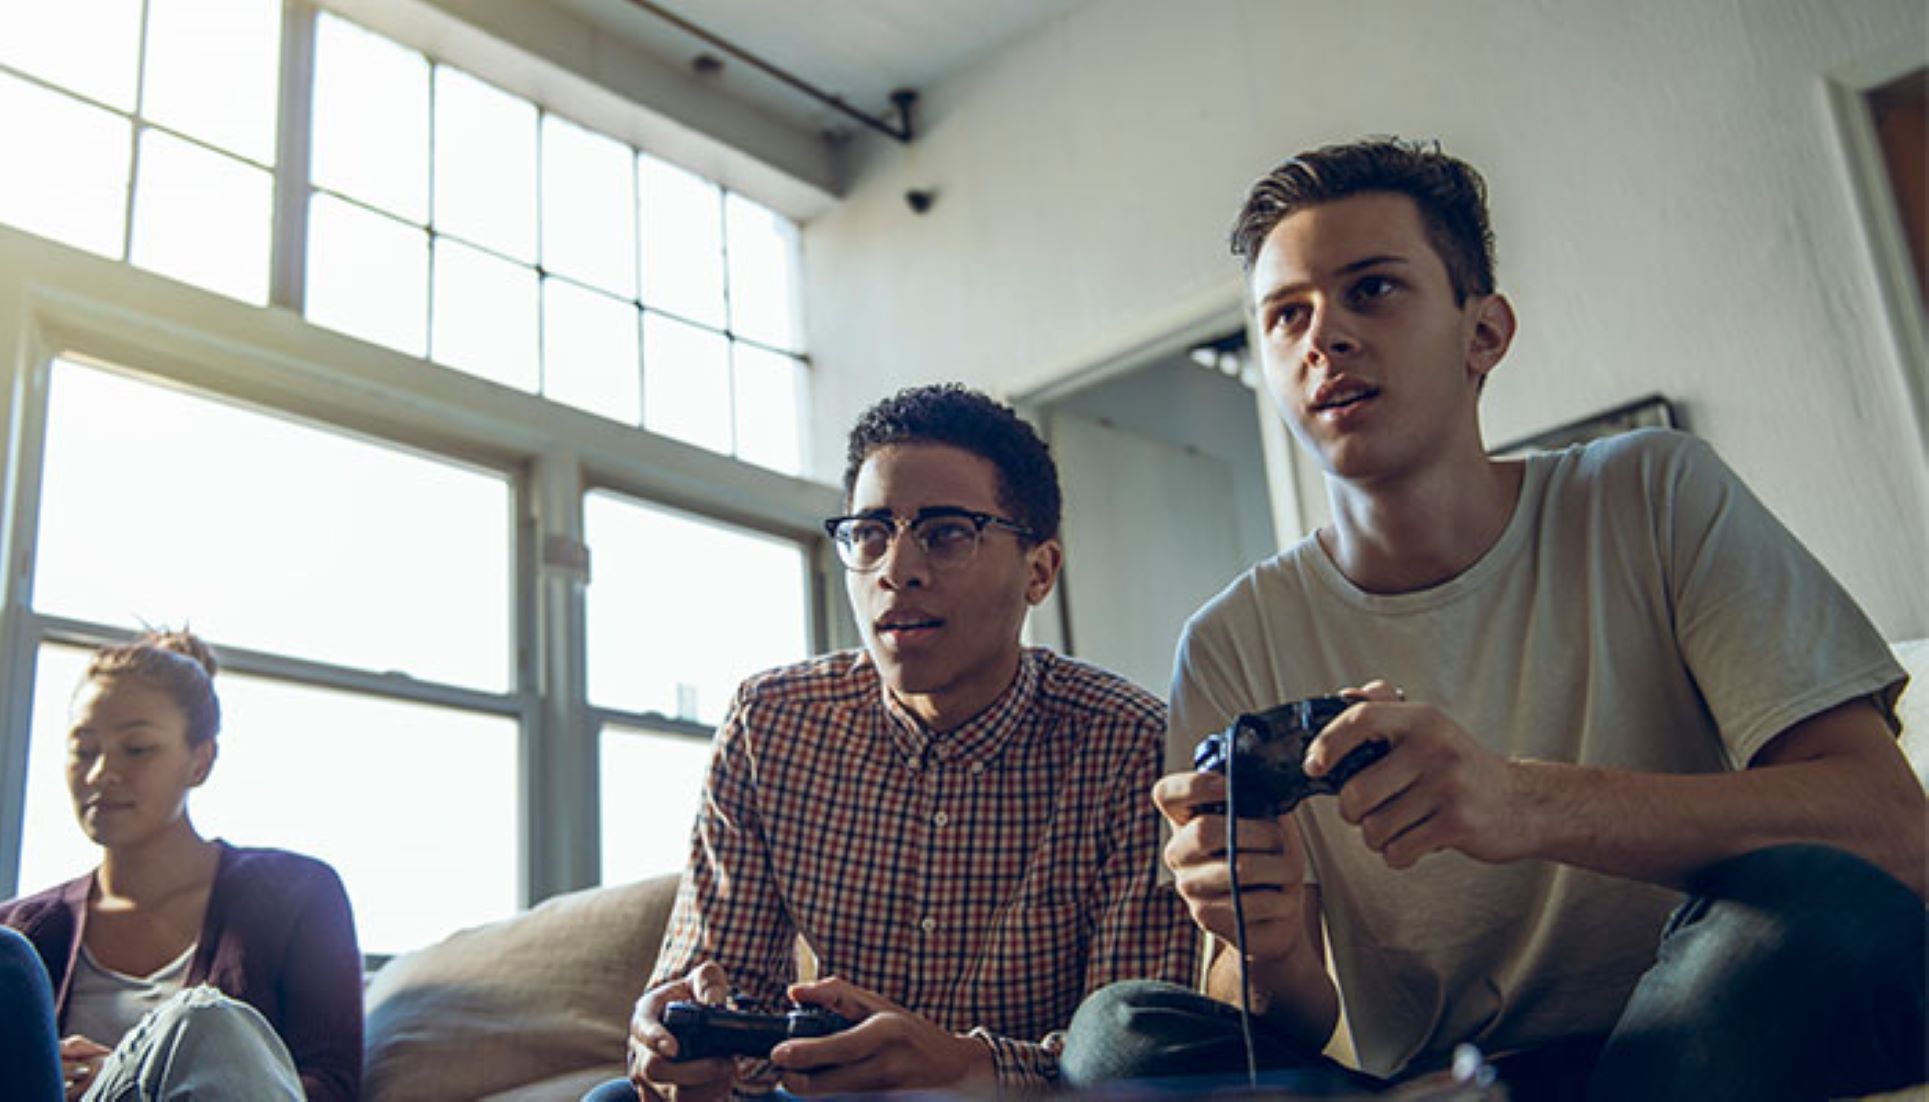 Australian Researchers Uncover Physical Problems Sparked By Excessive Video Gaming